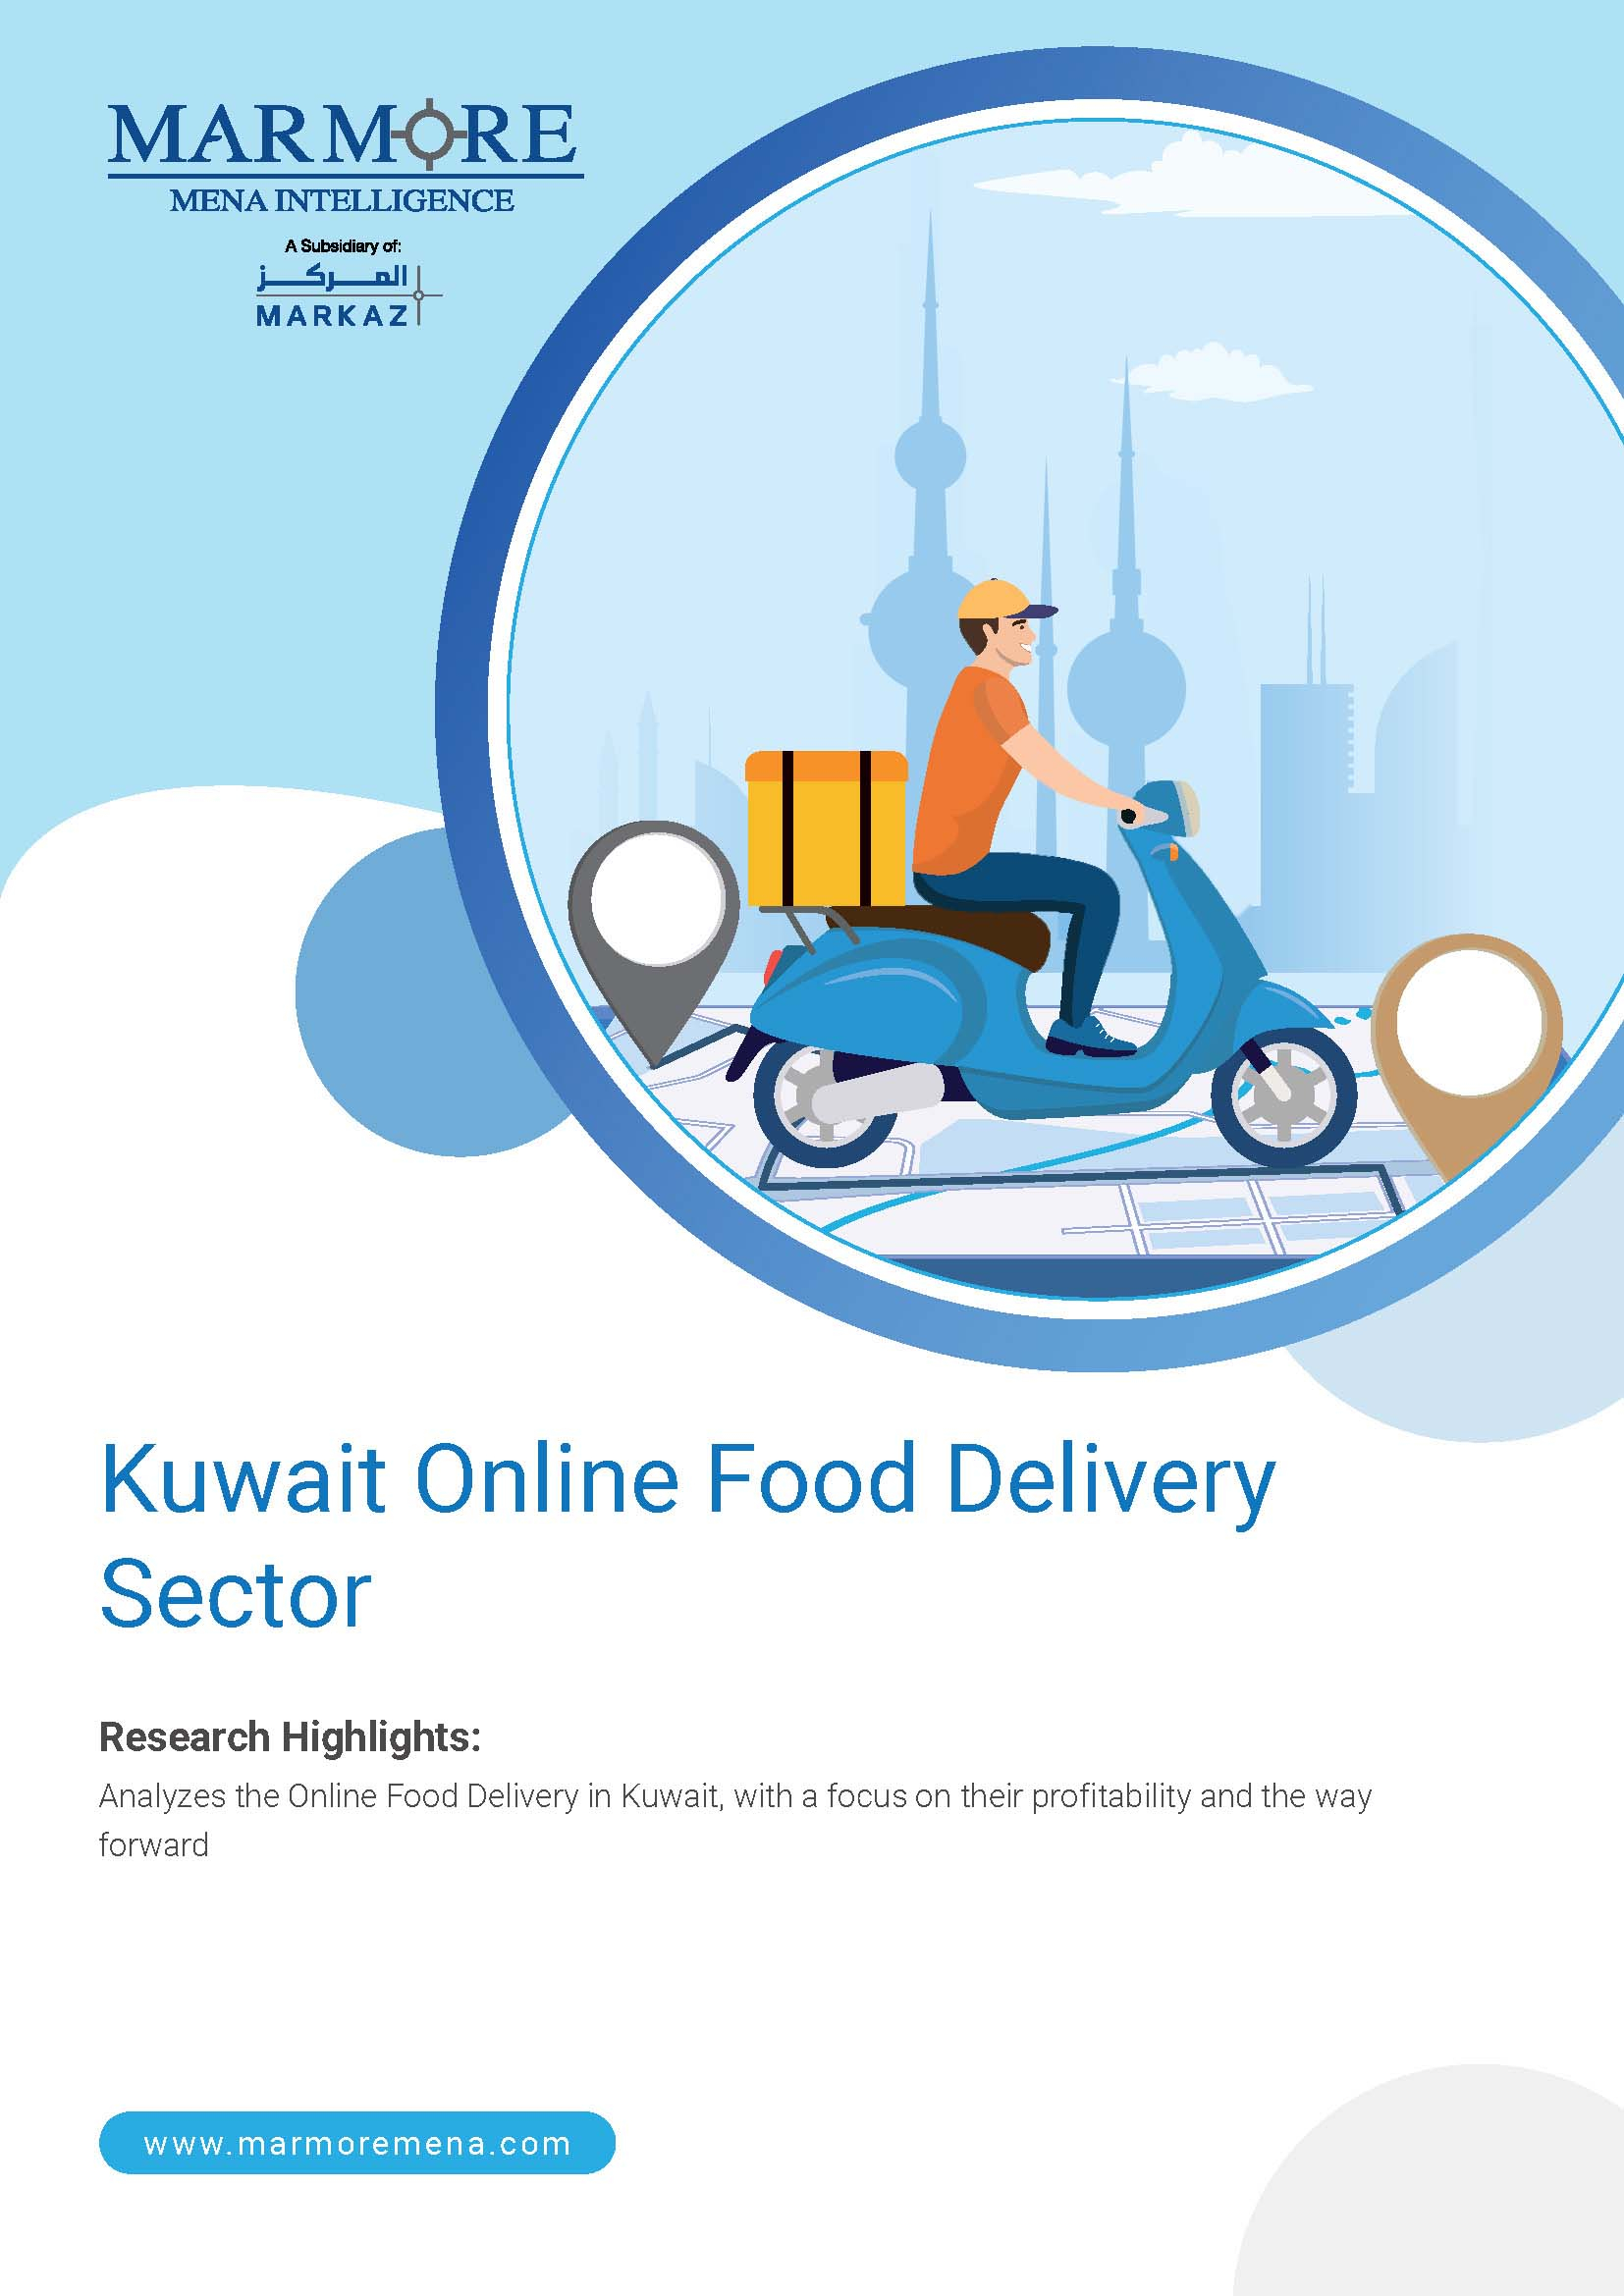 Kuwait Online Food Delivery Sector